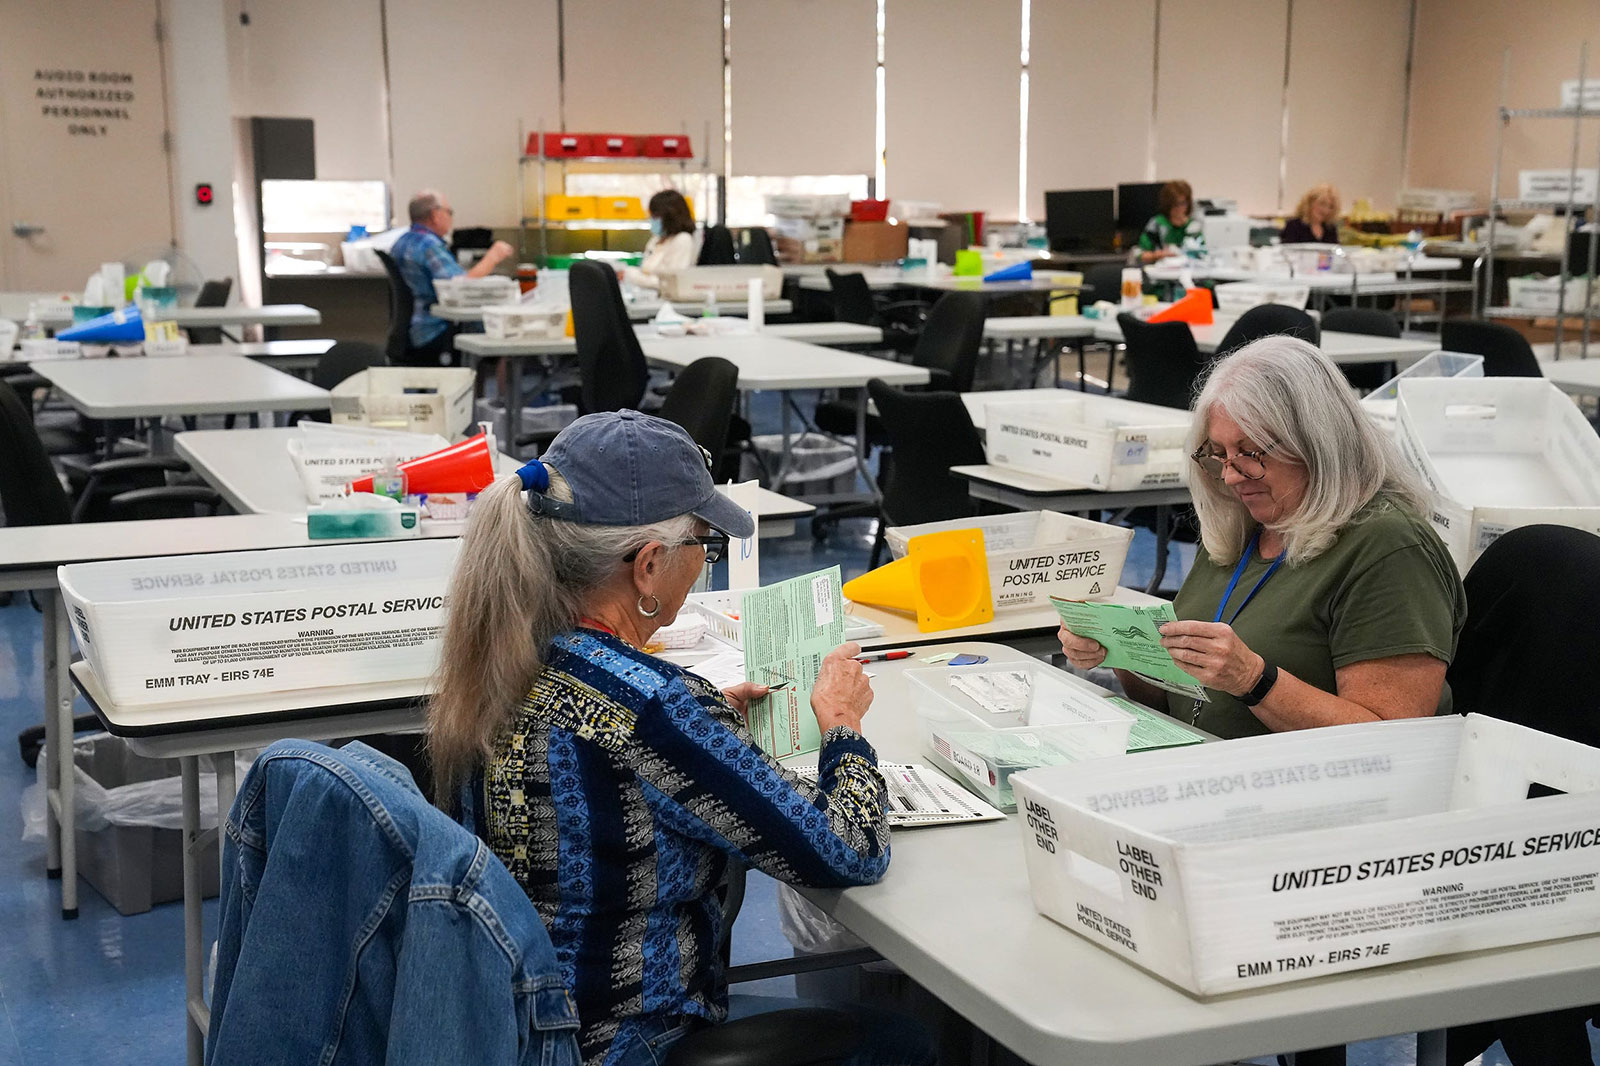 Election workers process ballots at Maricopa County Tabulation and Election Center on November 13, in Phoenix.